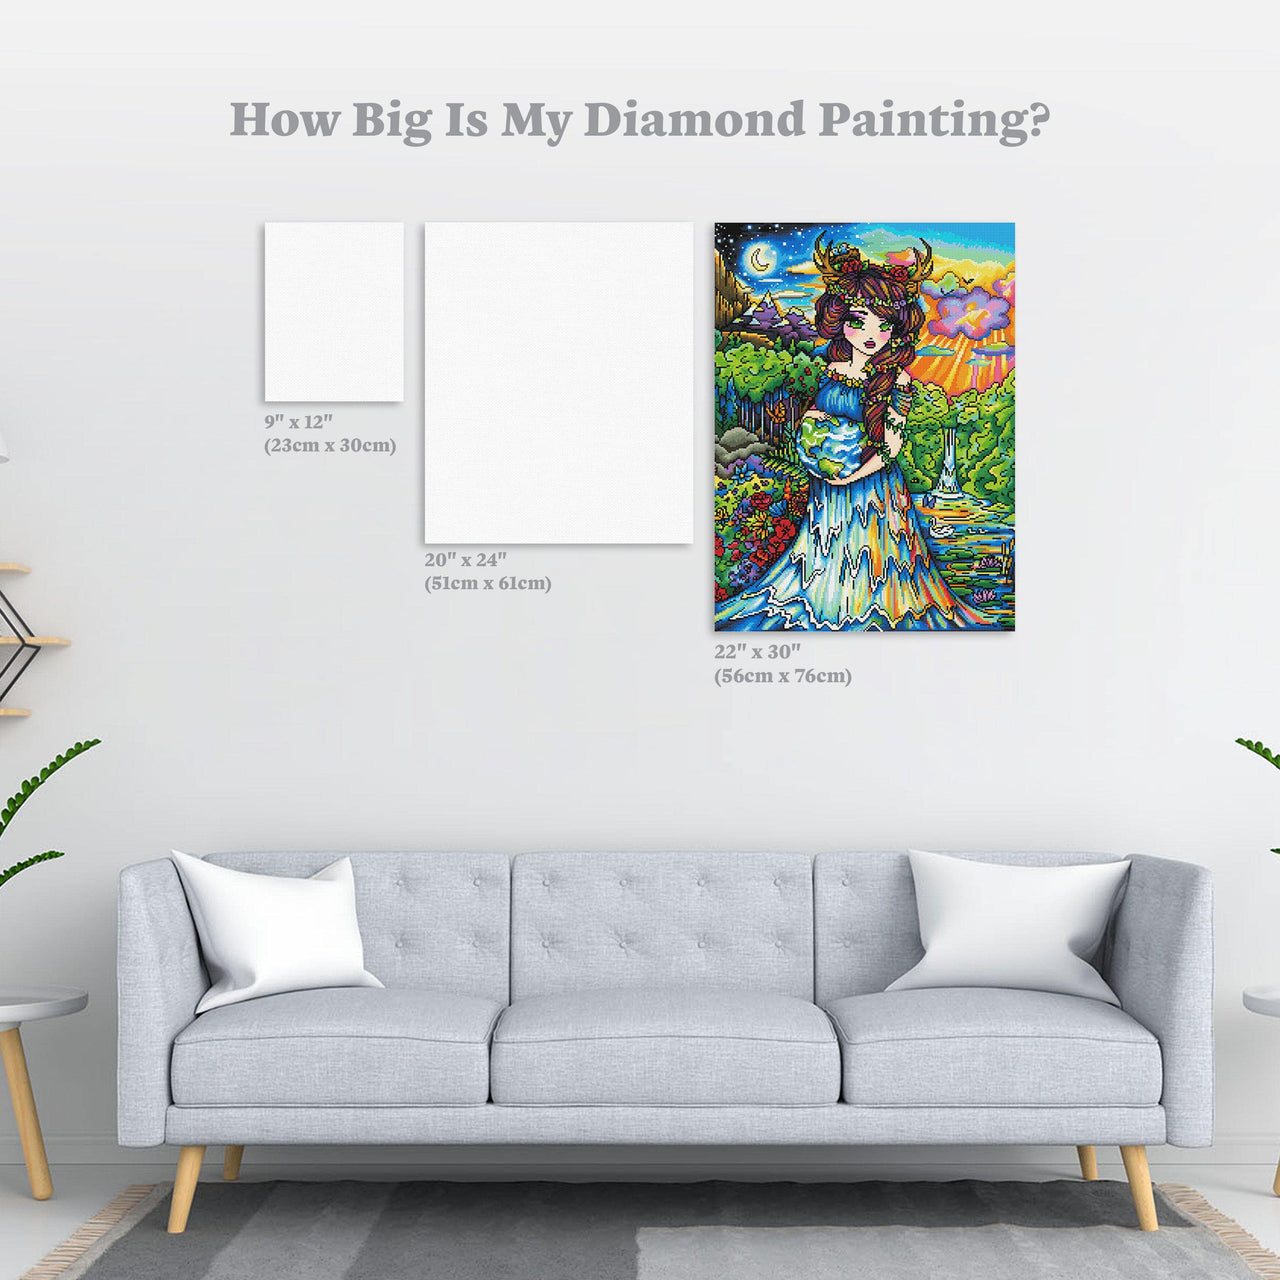 Diamond Painting Mother Earth 22" x 30″ (56cm x 76cm) / Round with 53 Colors including 2 ABs